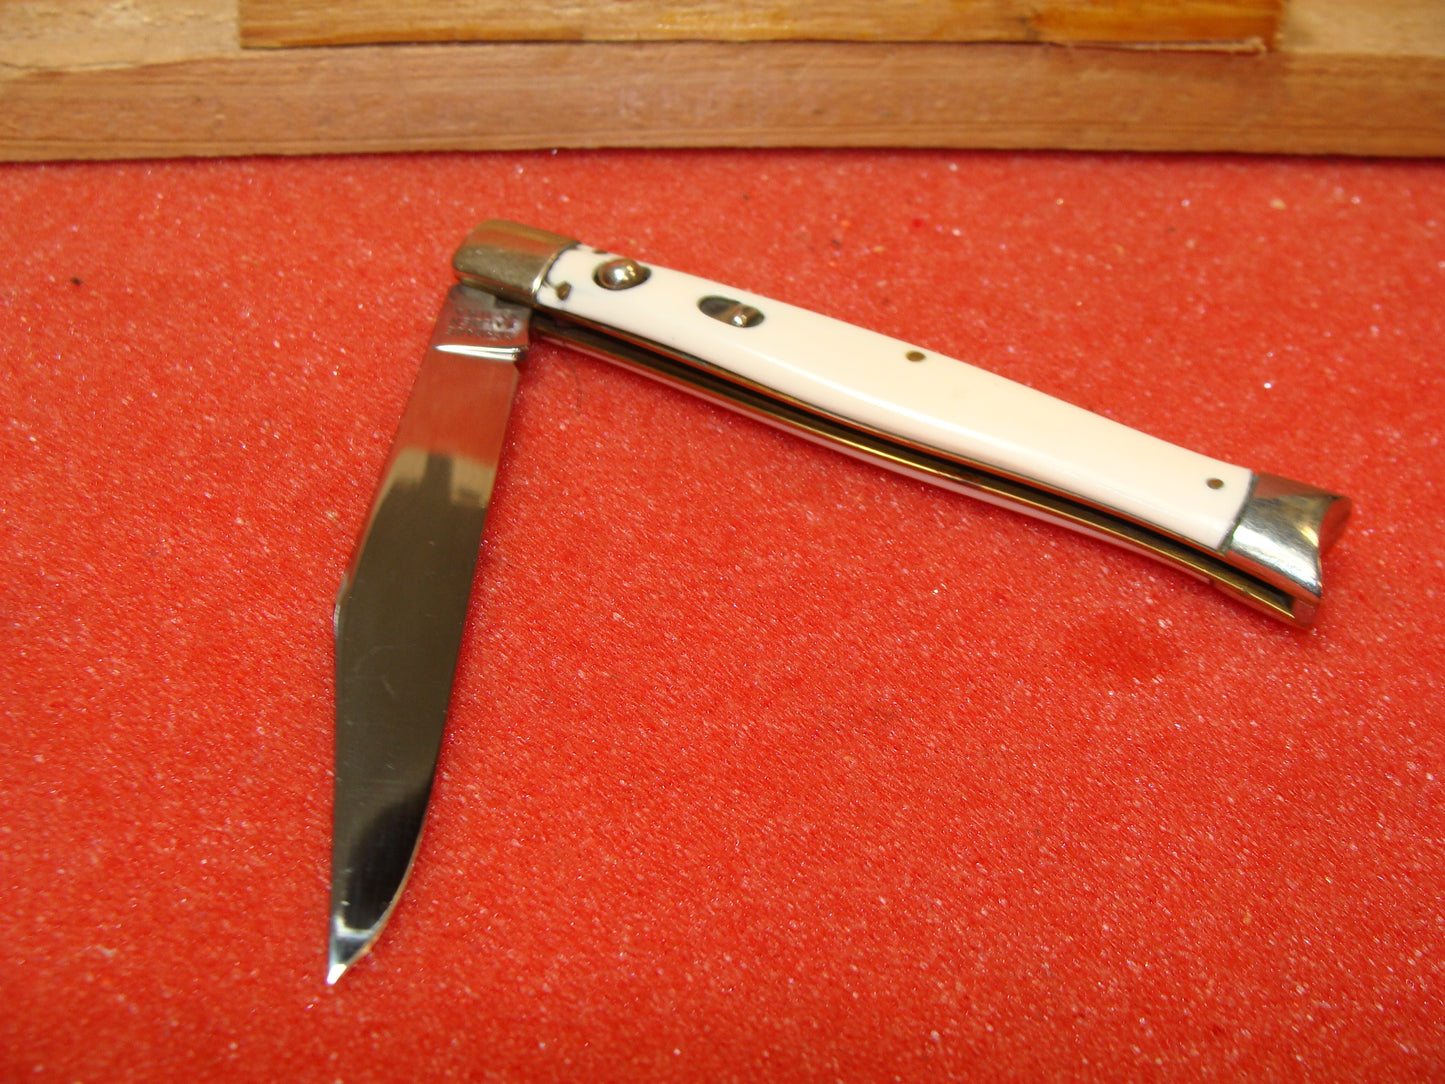 SCHRADE WALDEN NY USA 1950-56 VINTAGE AMERICAN AUTOMATIC KNIFE 4" FISH TAIL WHITE COMPOSITION HANDLES